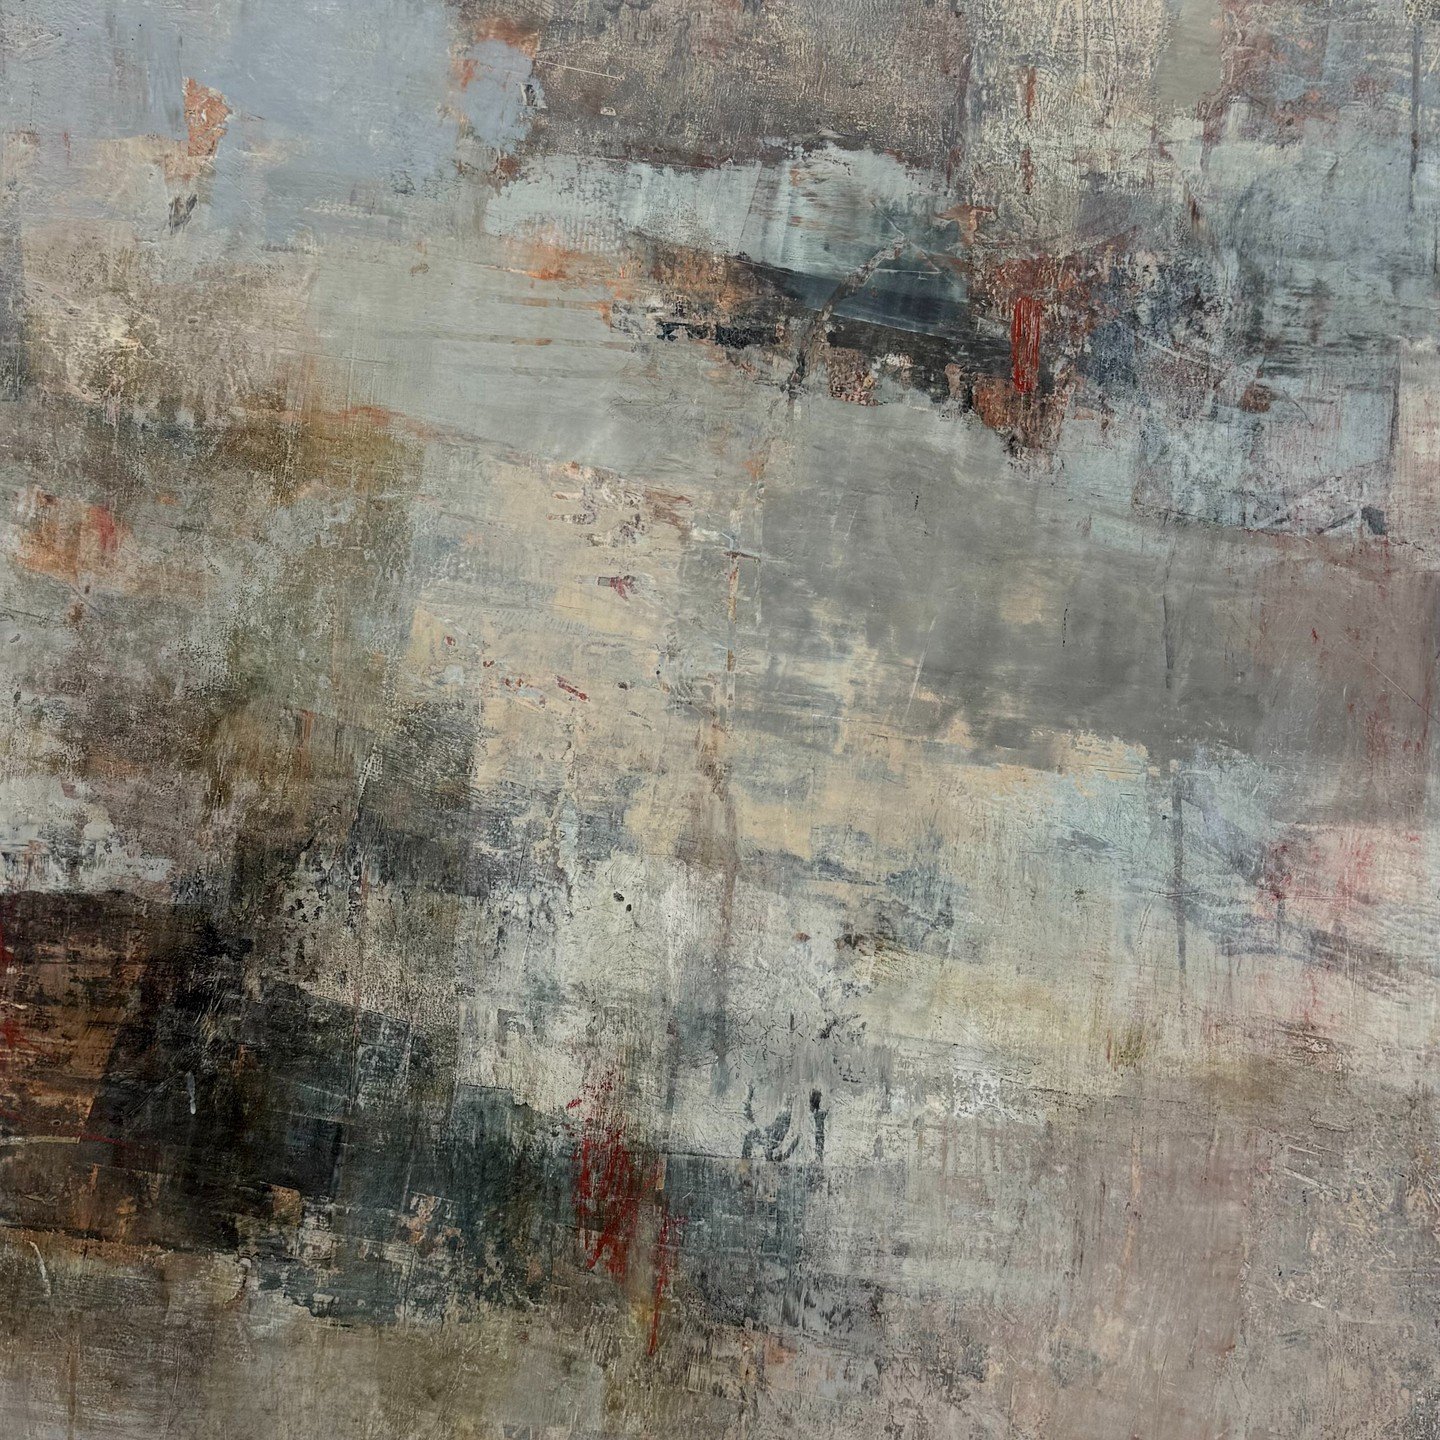 Detail from another piece by artist Rebecca Crowell on exhibit at Thomas Deans Fine Art right now. Beautiful show that you shouldn't miss!

#artsychowroamer
#thequirkytourist
#rebeccacrowell
#ladypaintings
#artfulideal
#thomasdeansfineart